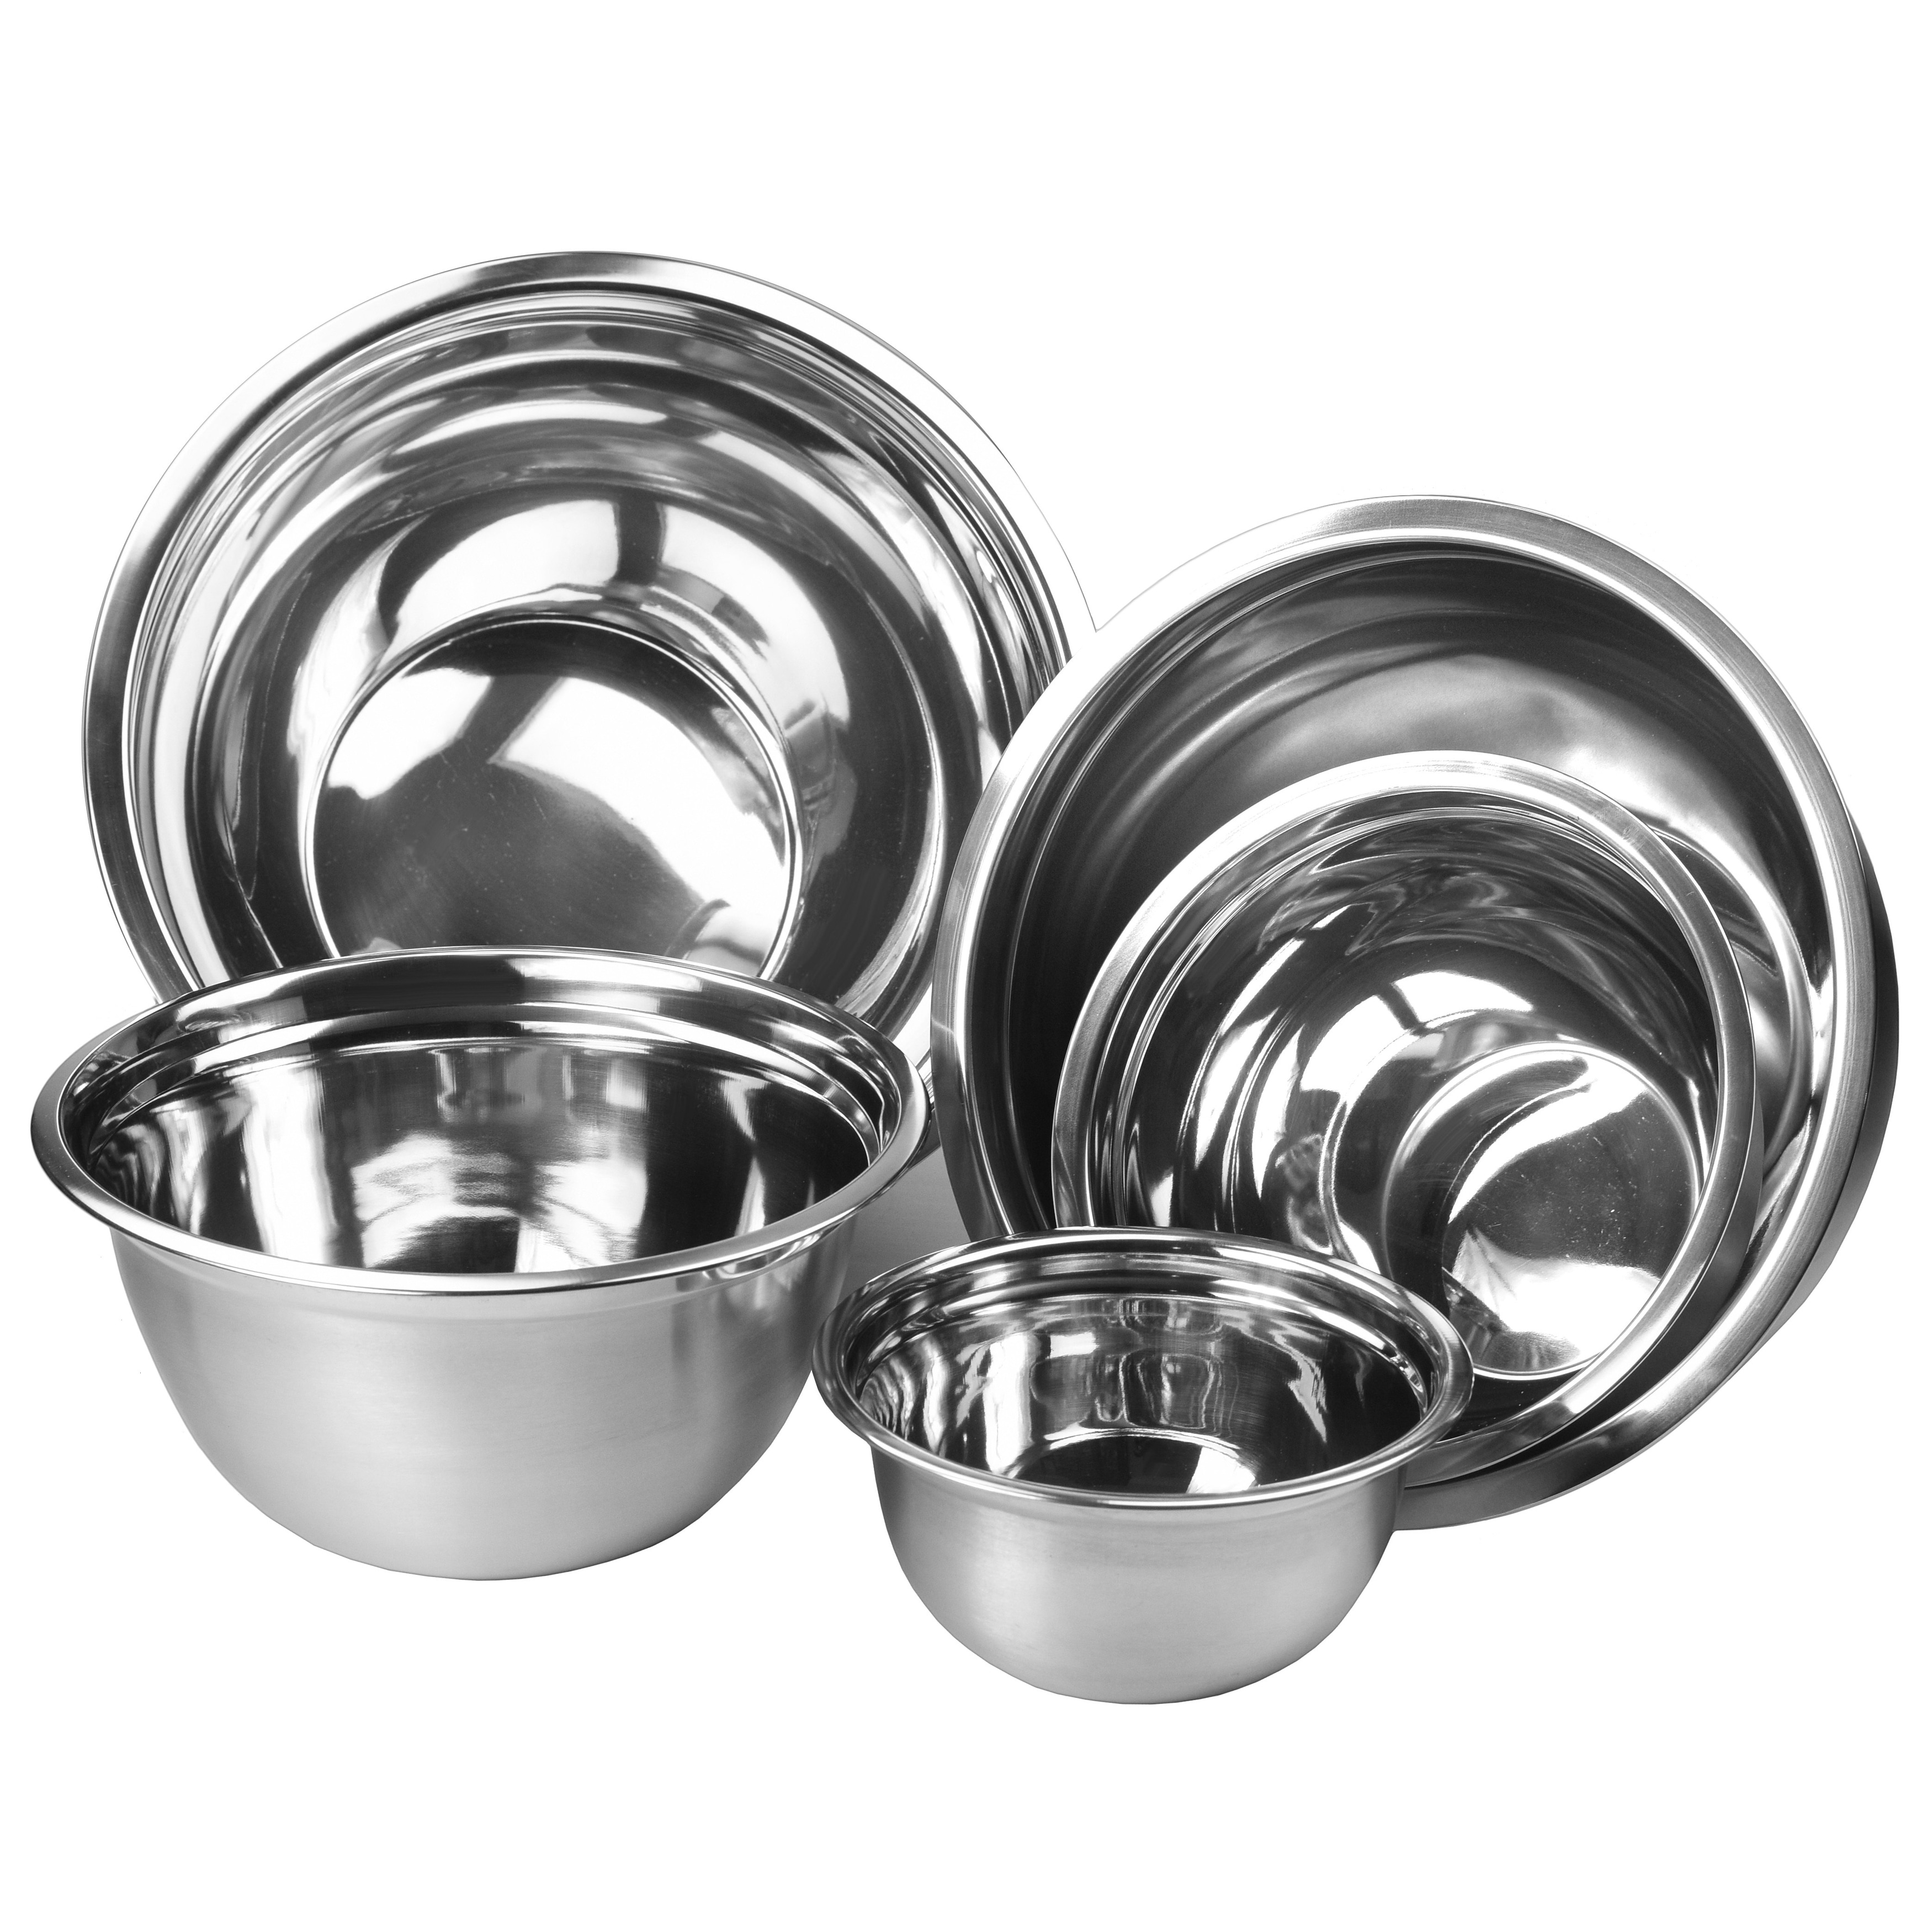 Stainless Steel Mixing Bowl - Premium Polished Nes...